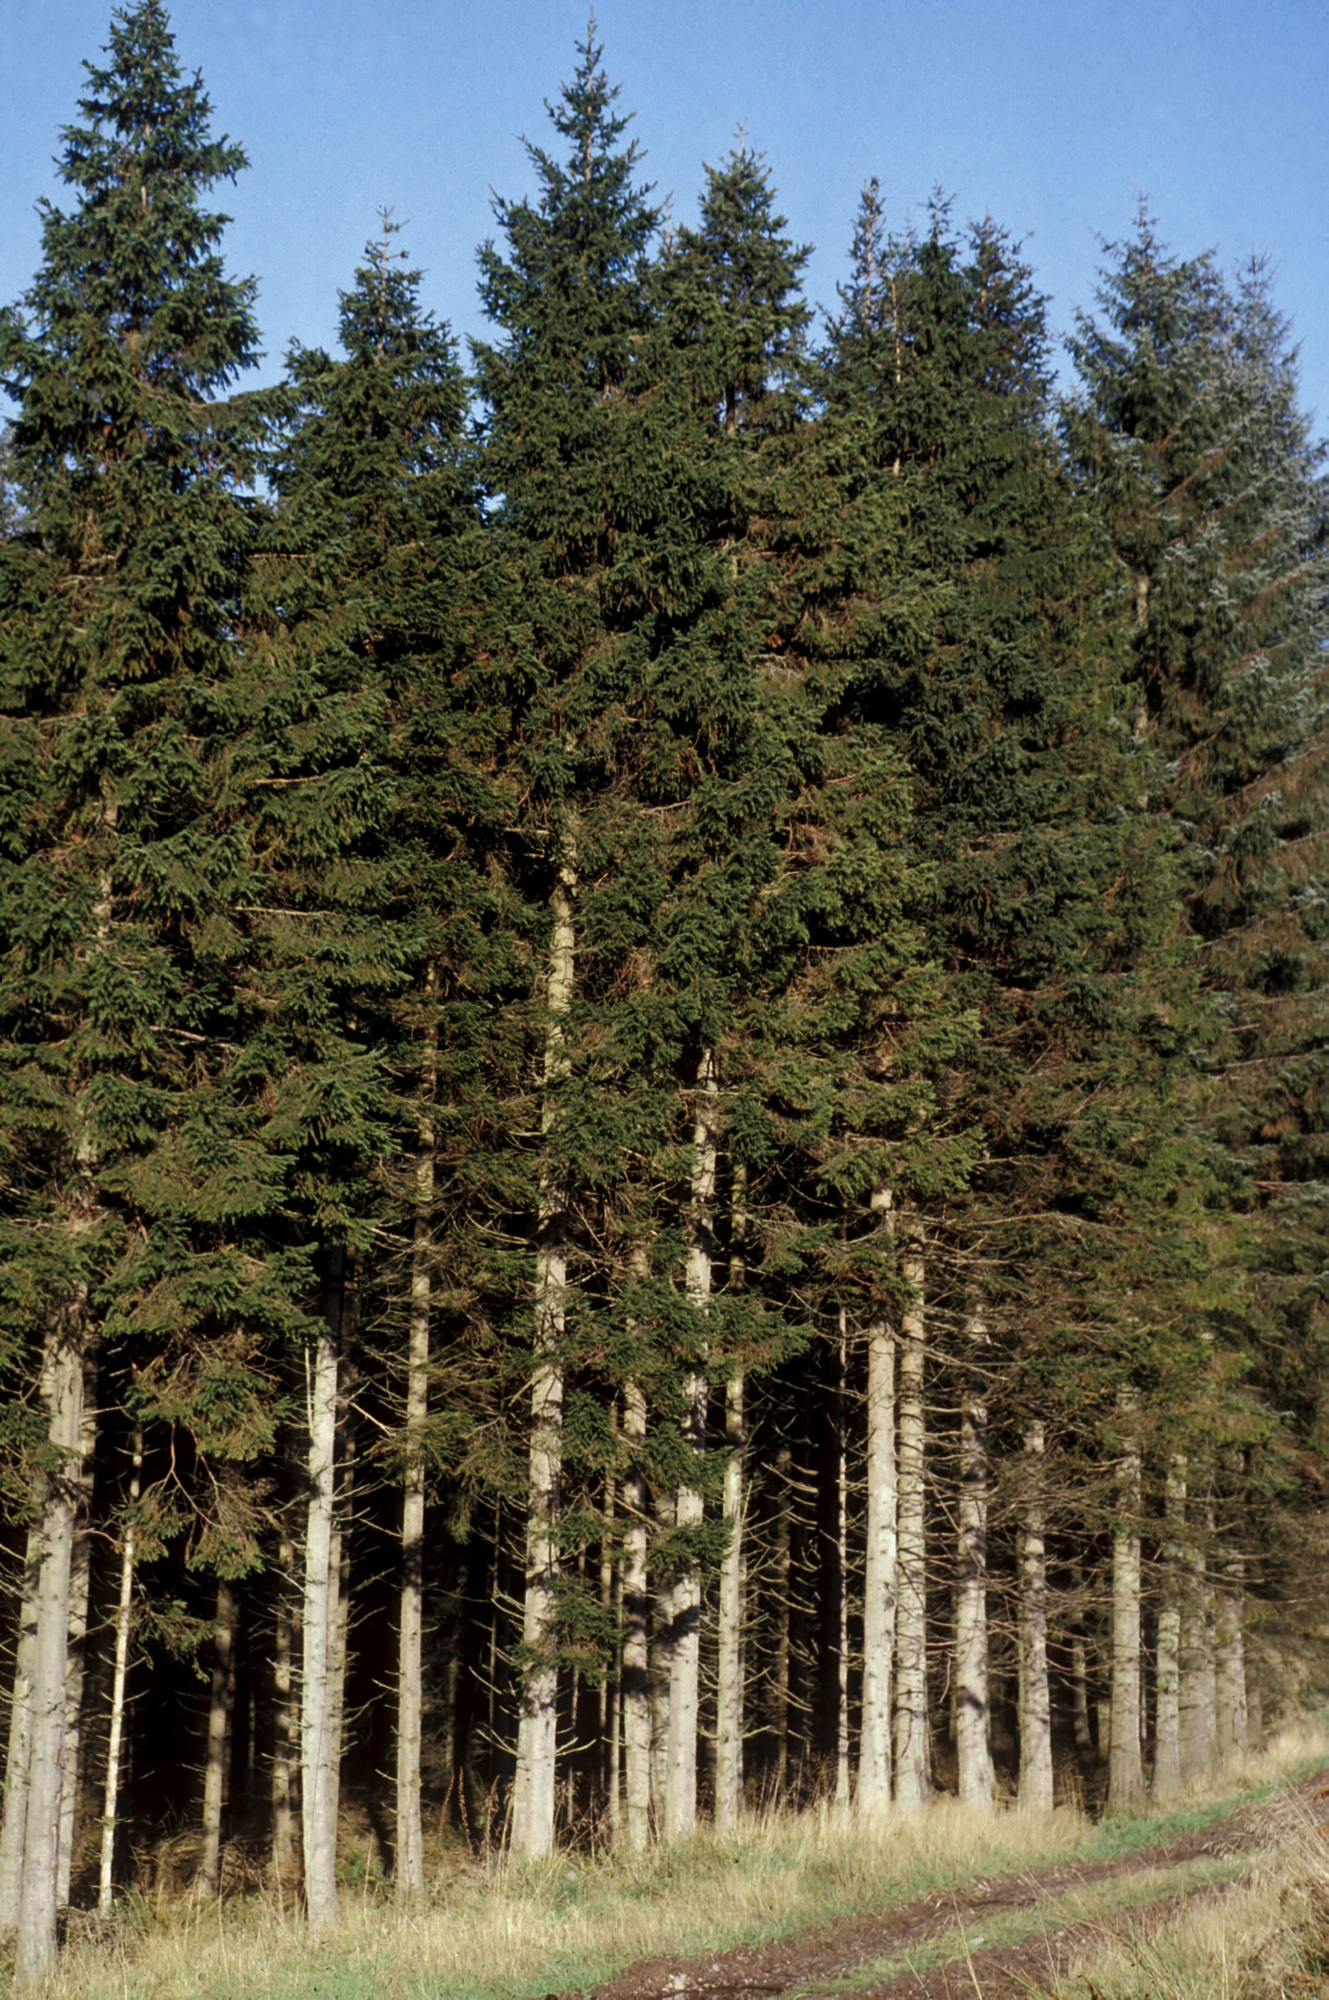 Picea abies. Norway spruce stand. Location: Ae, Dumfriesshire, Scotland.